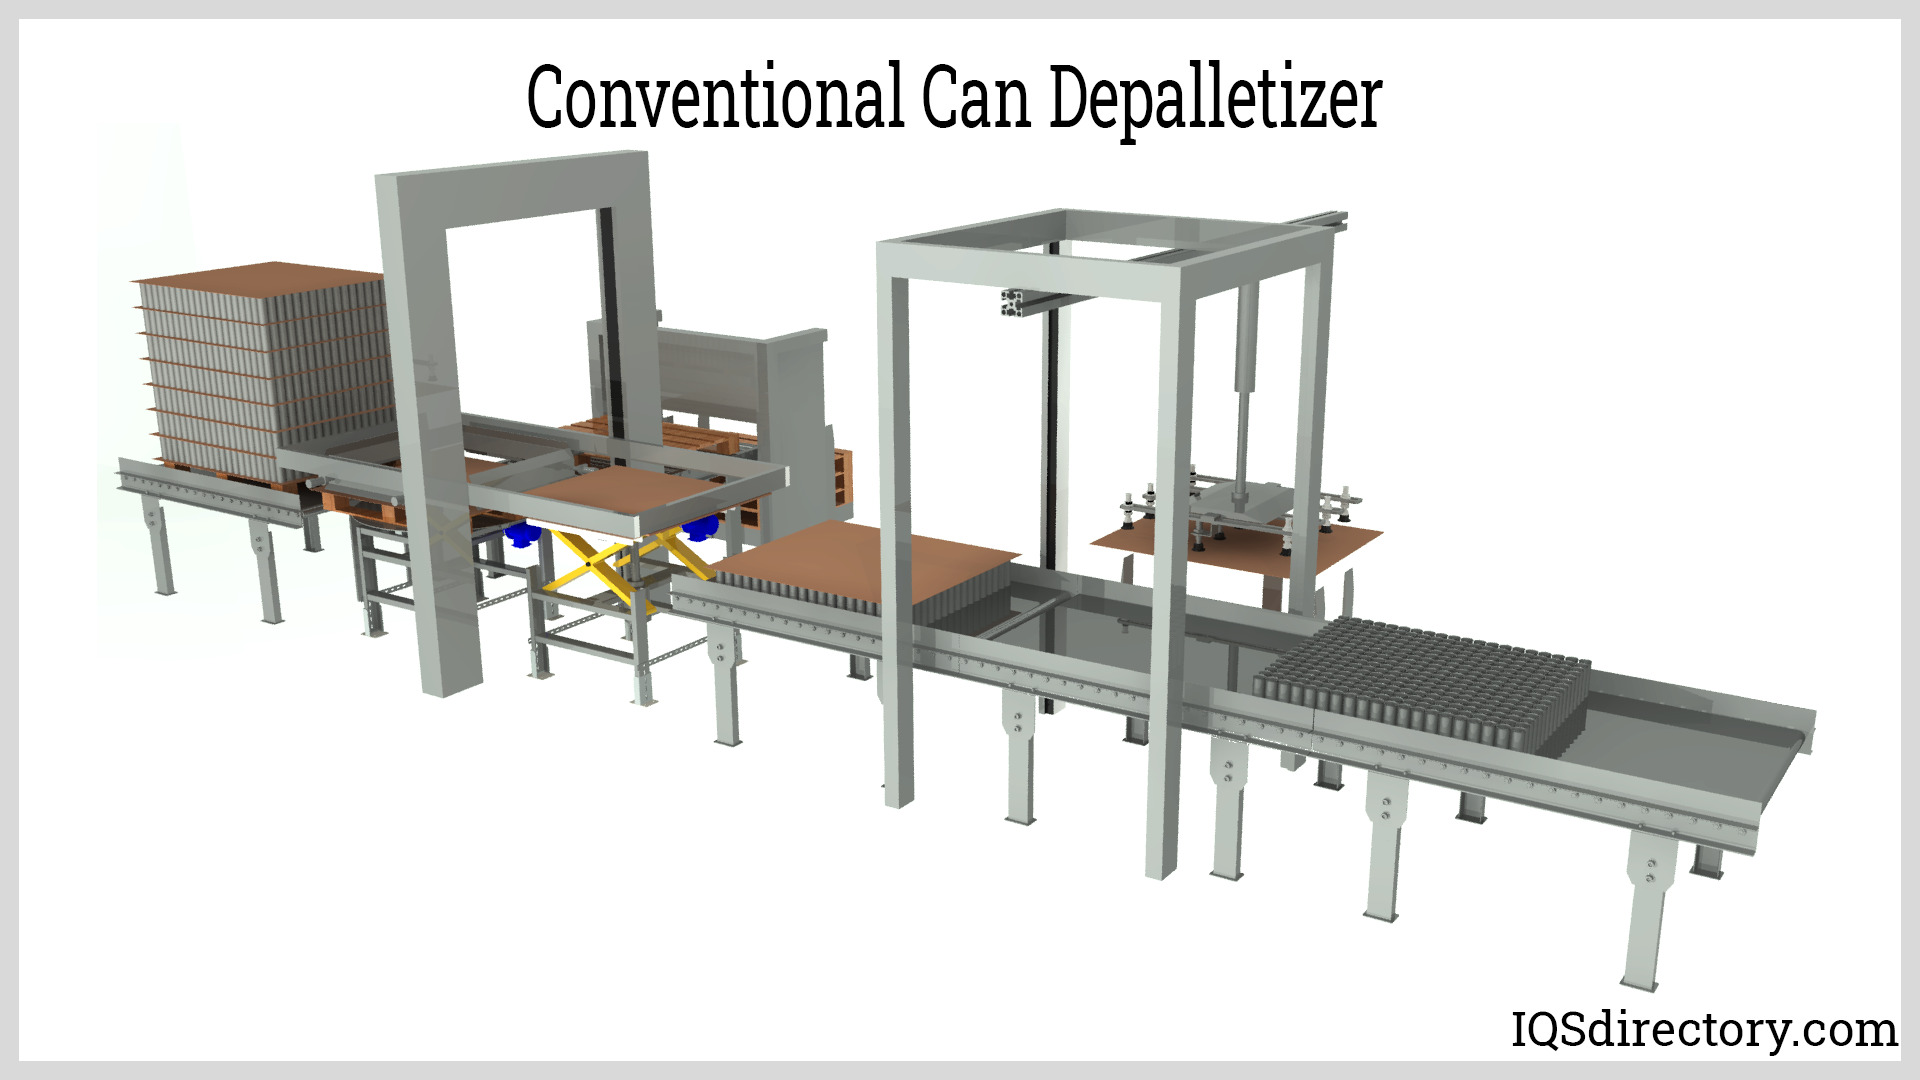 Conventional Can Depalletizer